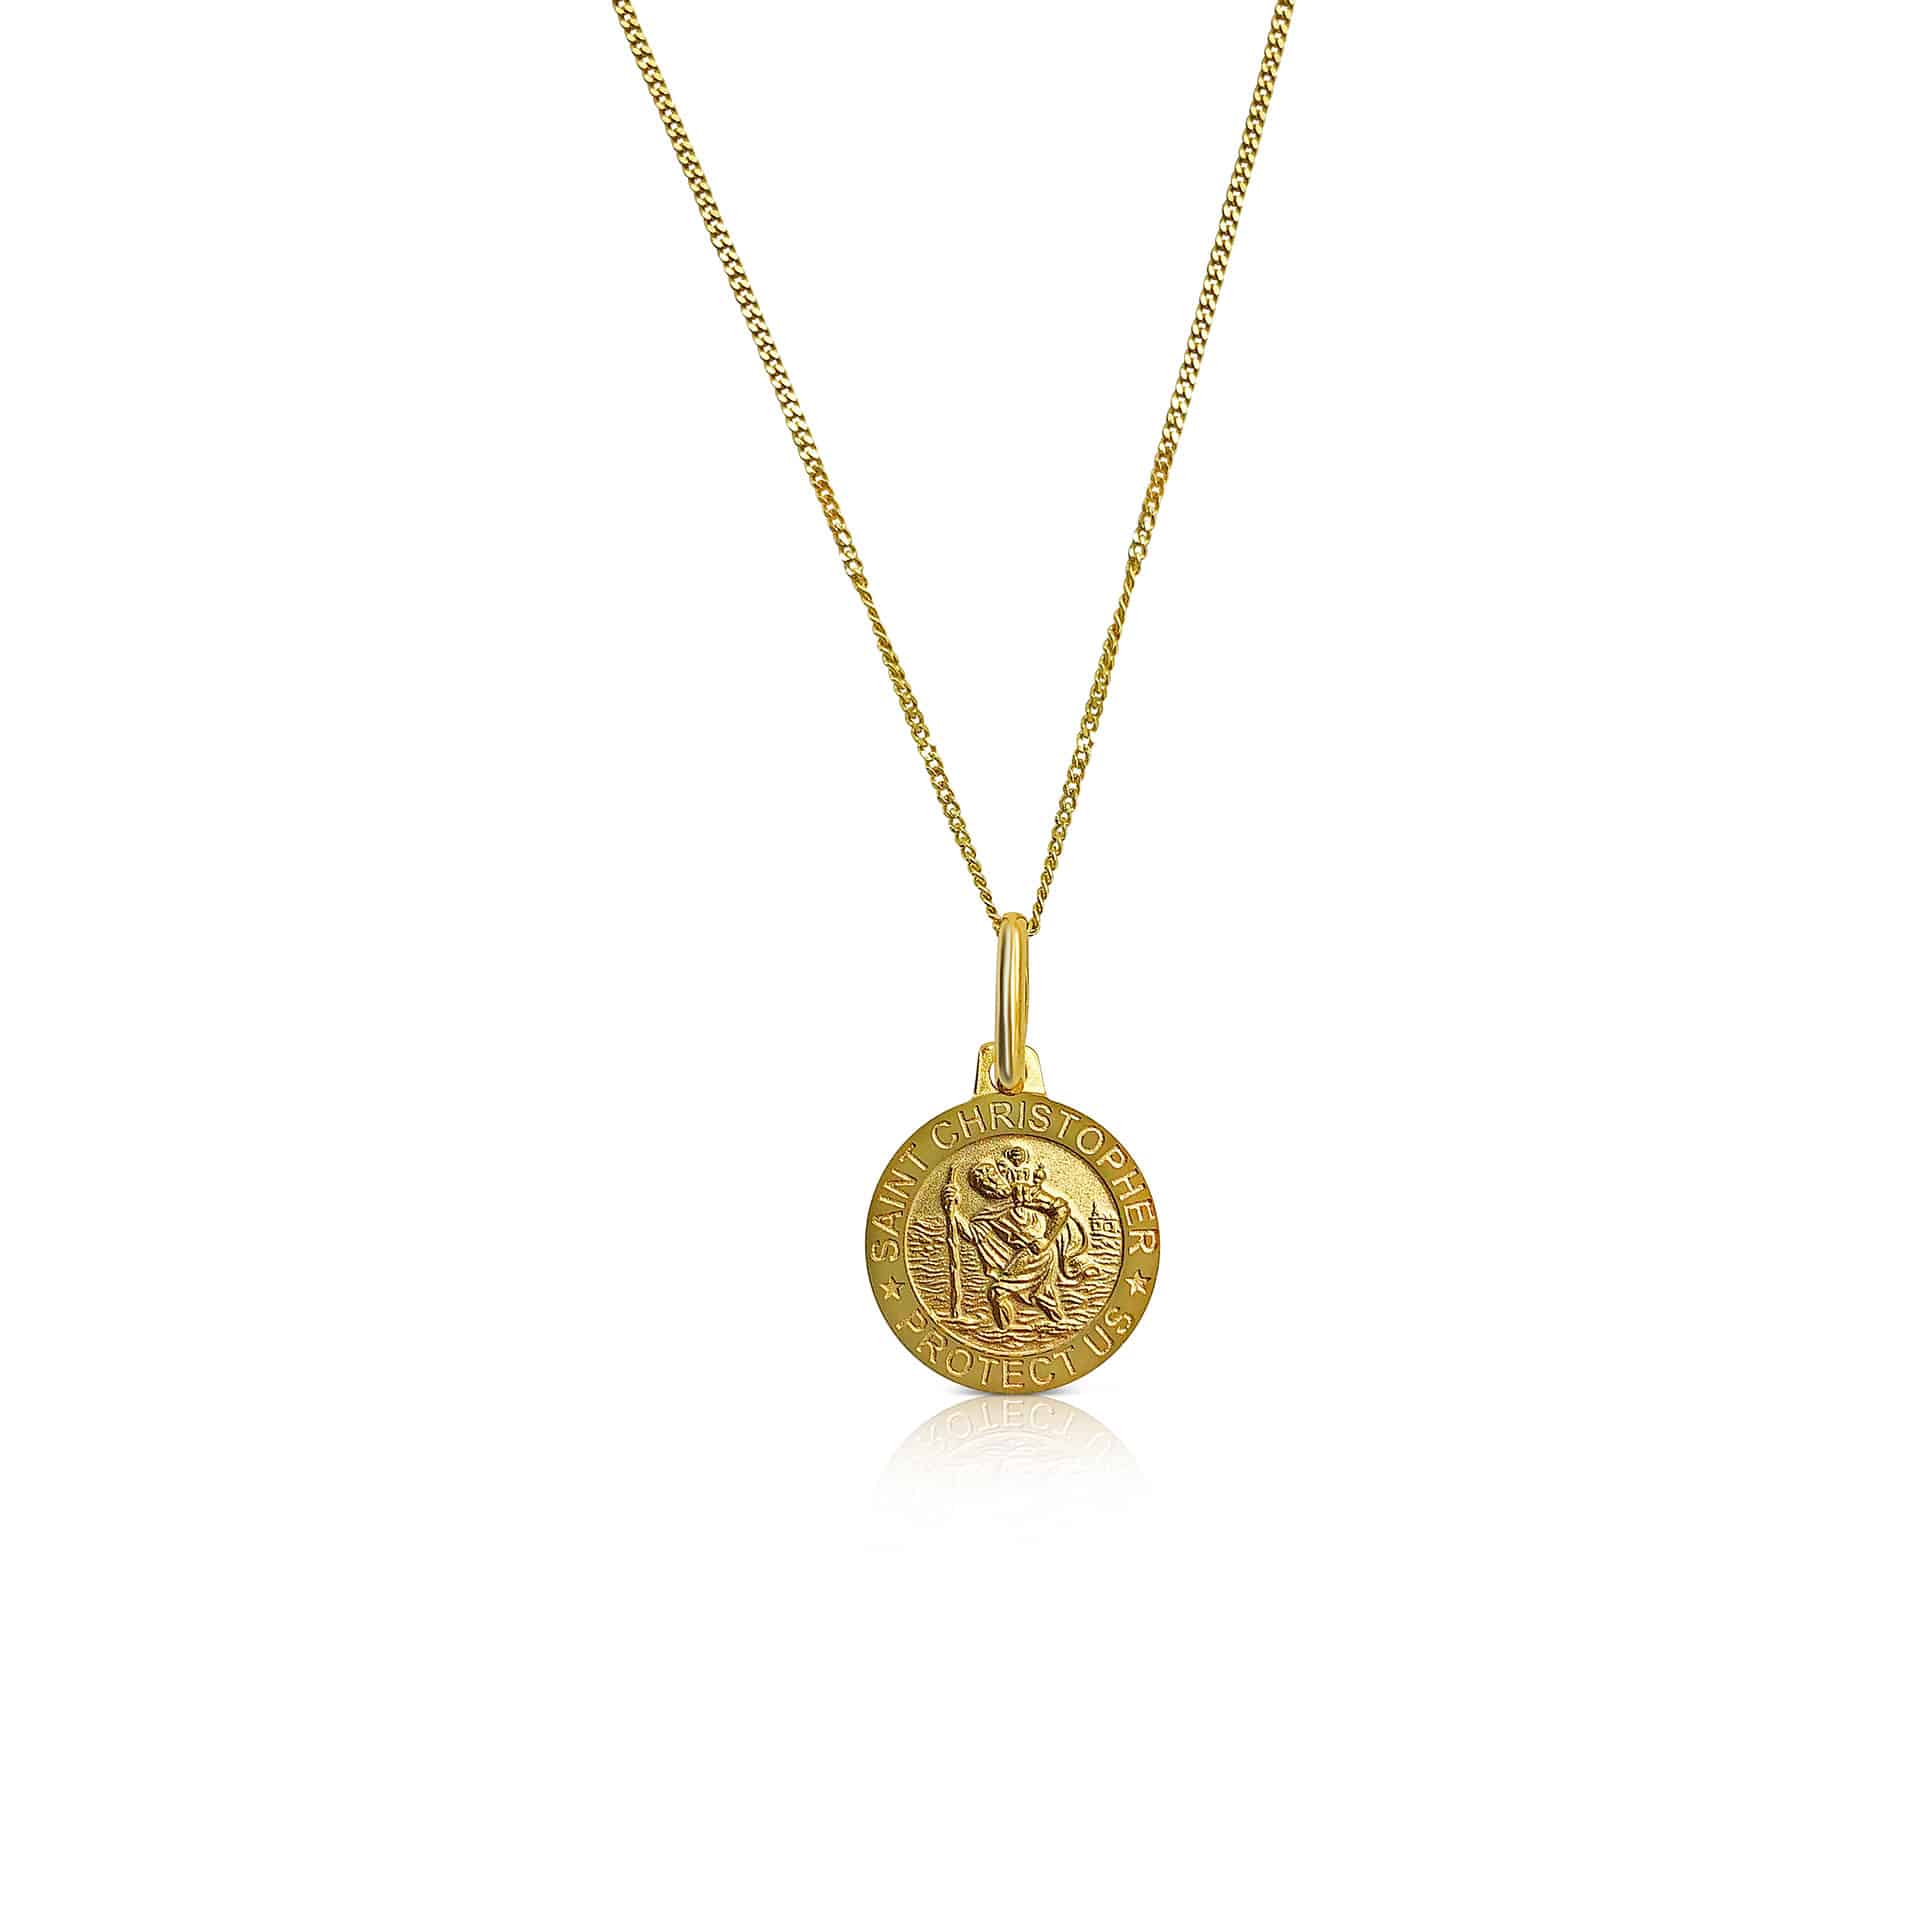 Ór Collection 9ct Yellow Gold St Christopher Necklace